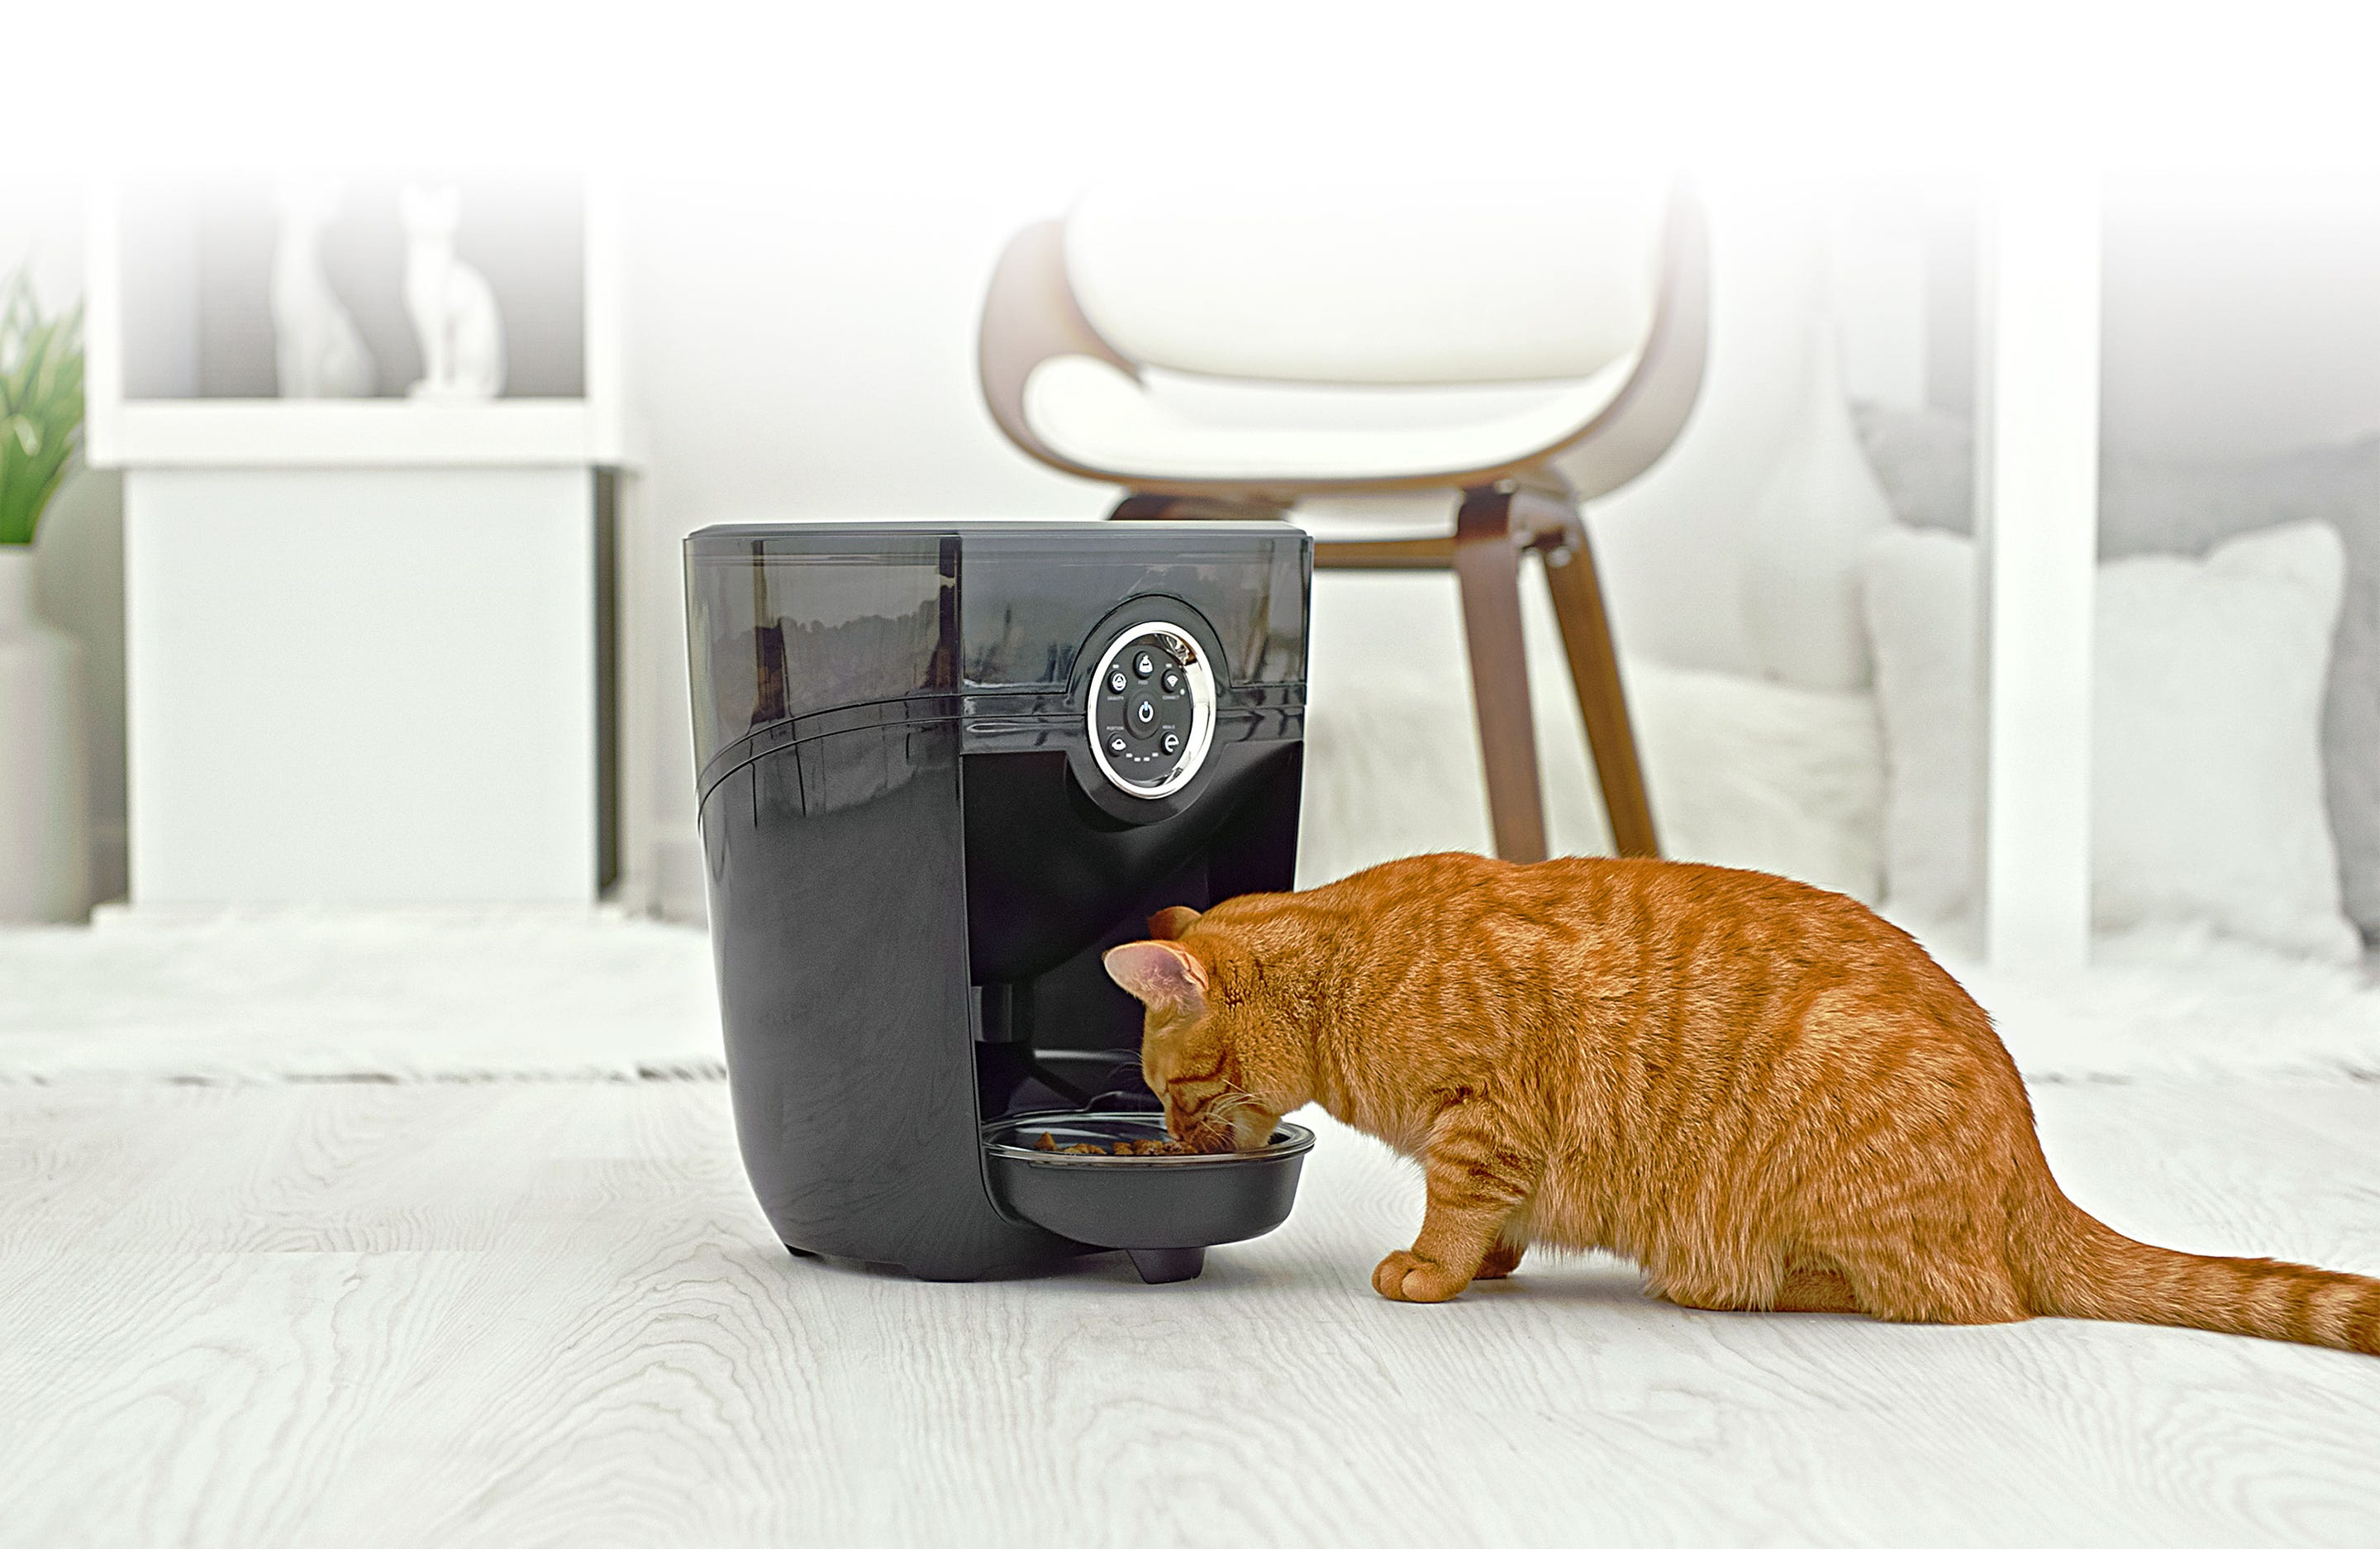 Orange cat eating from a Feeder-Robot